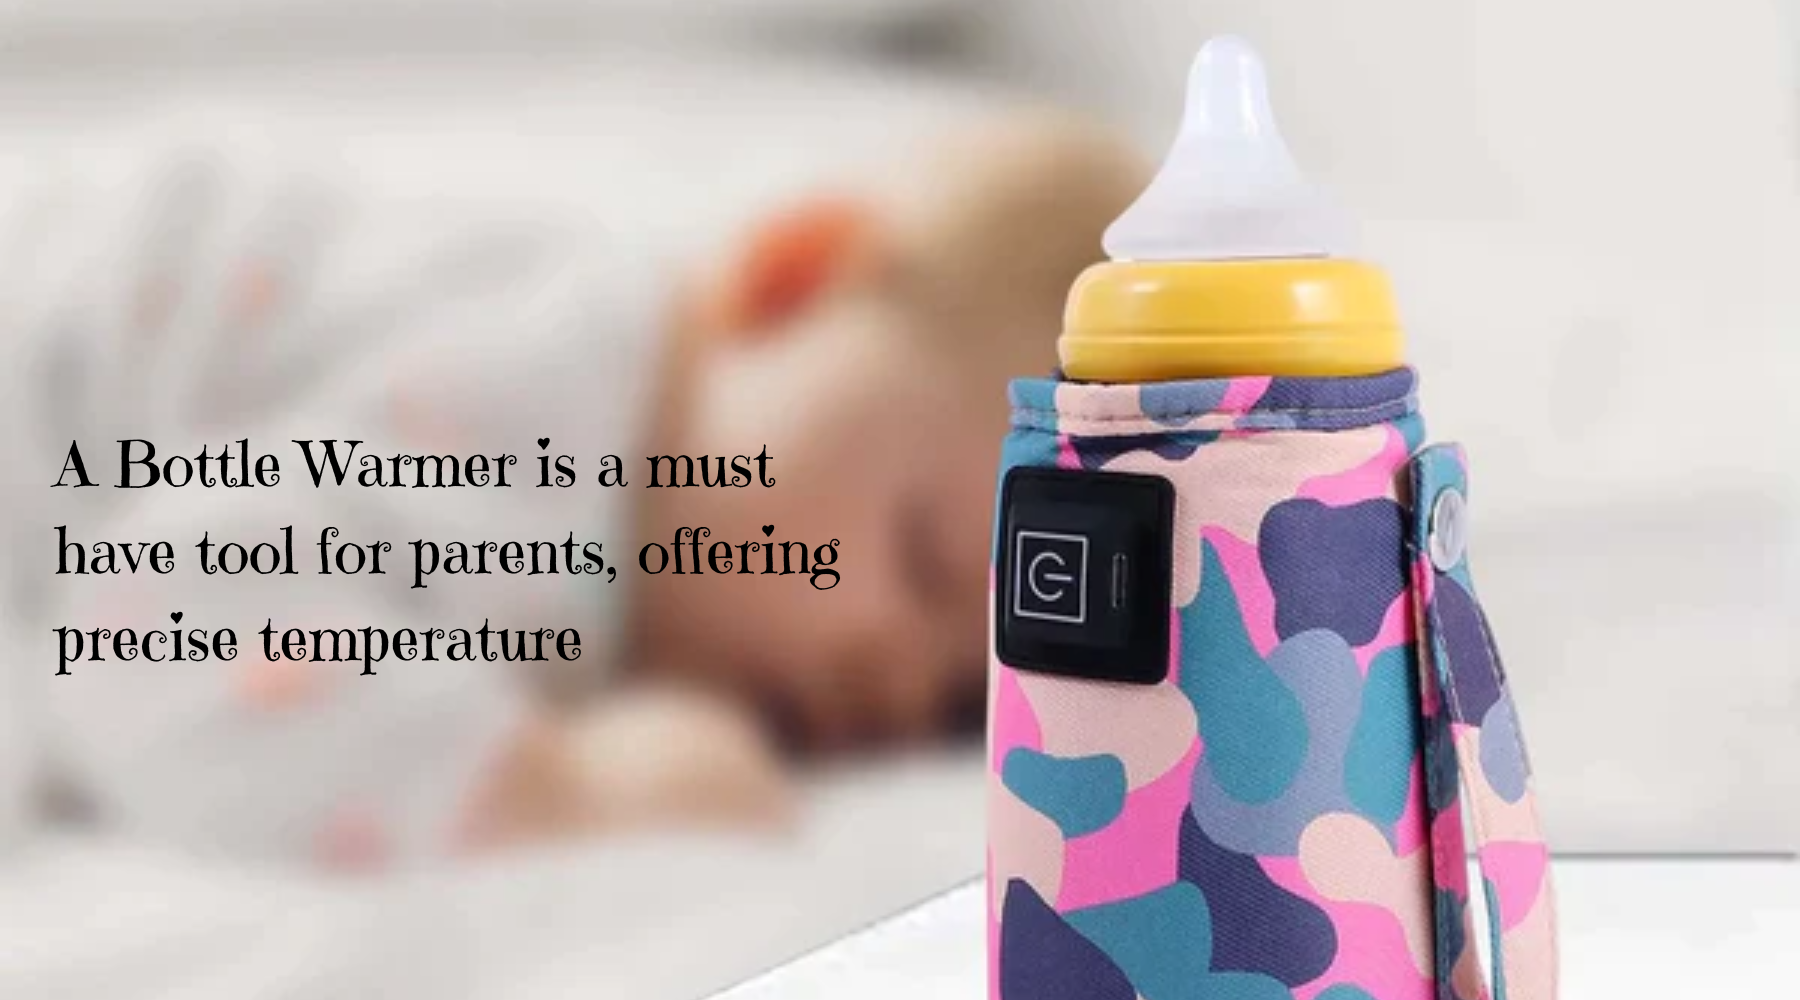 Know why your baby needs a Bottle Warmer